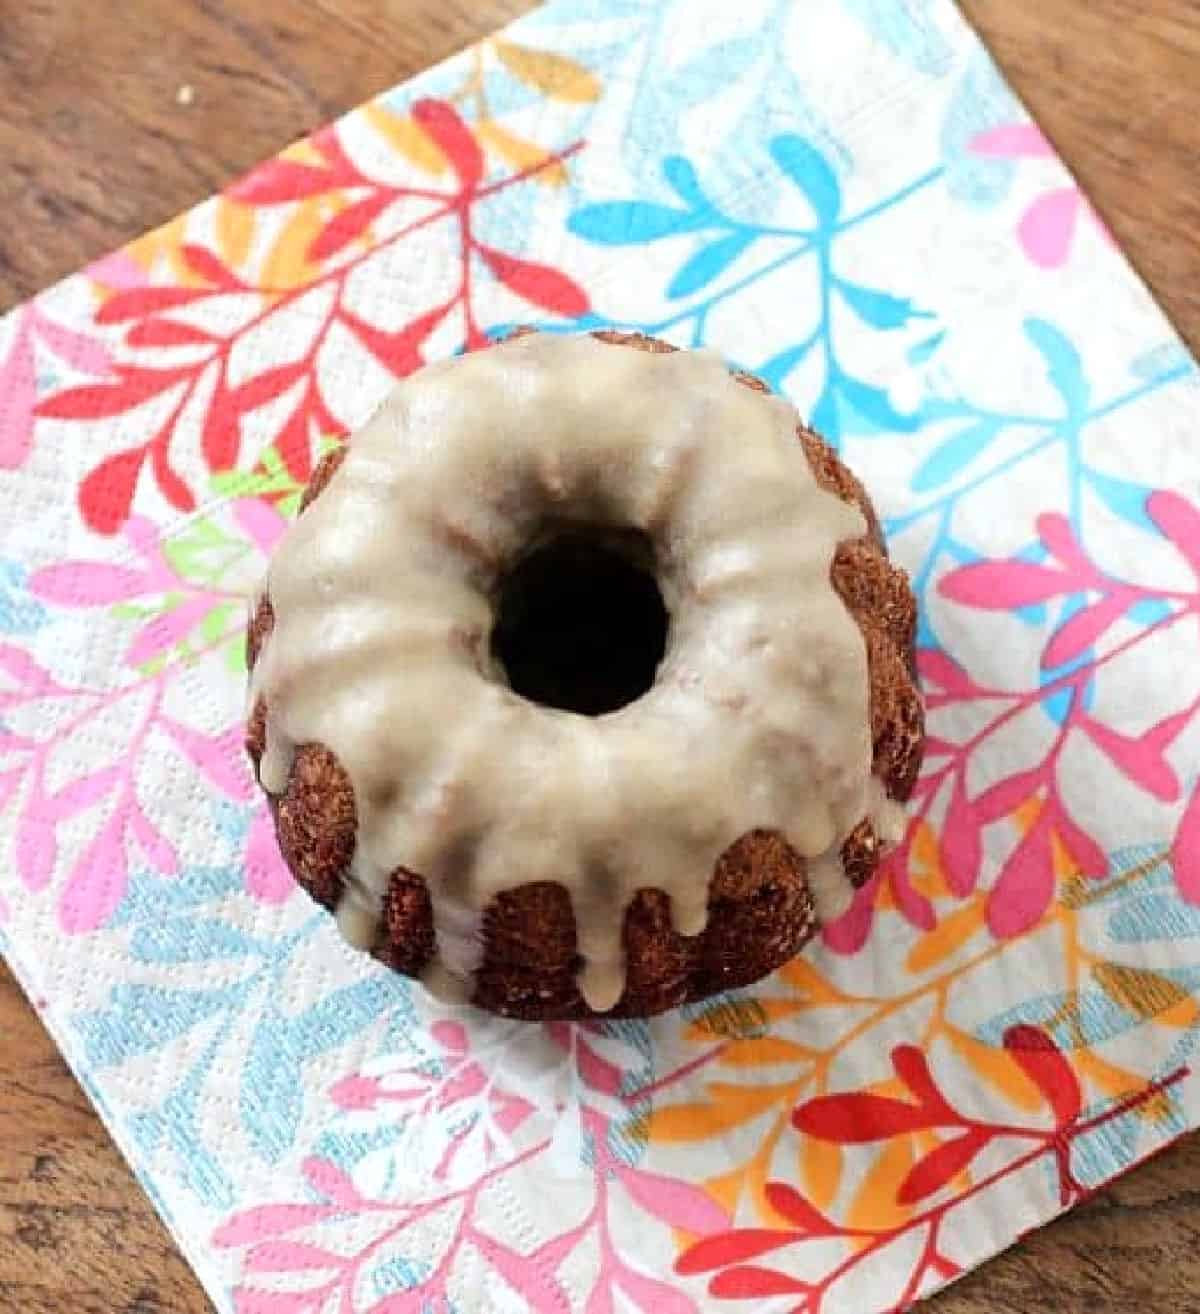 Colorful napkin on a wooden surface with a glazed chocolate mini bundt cake.